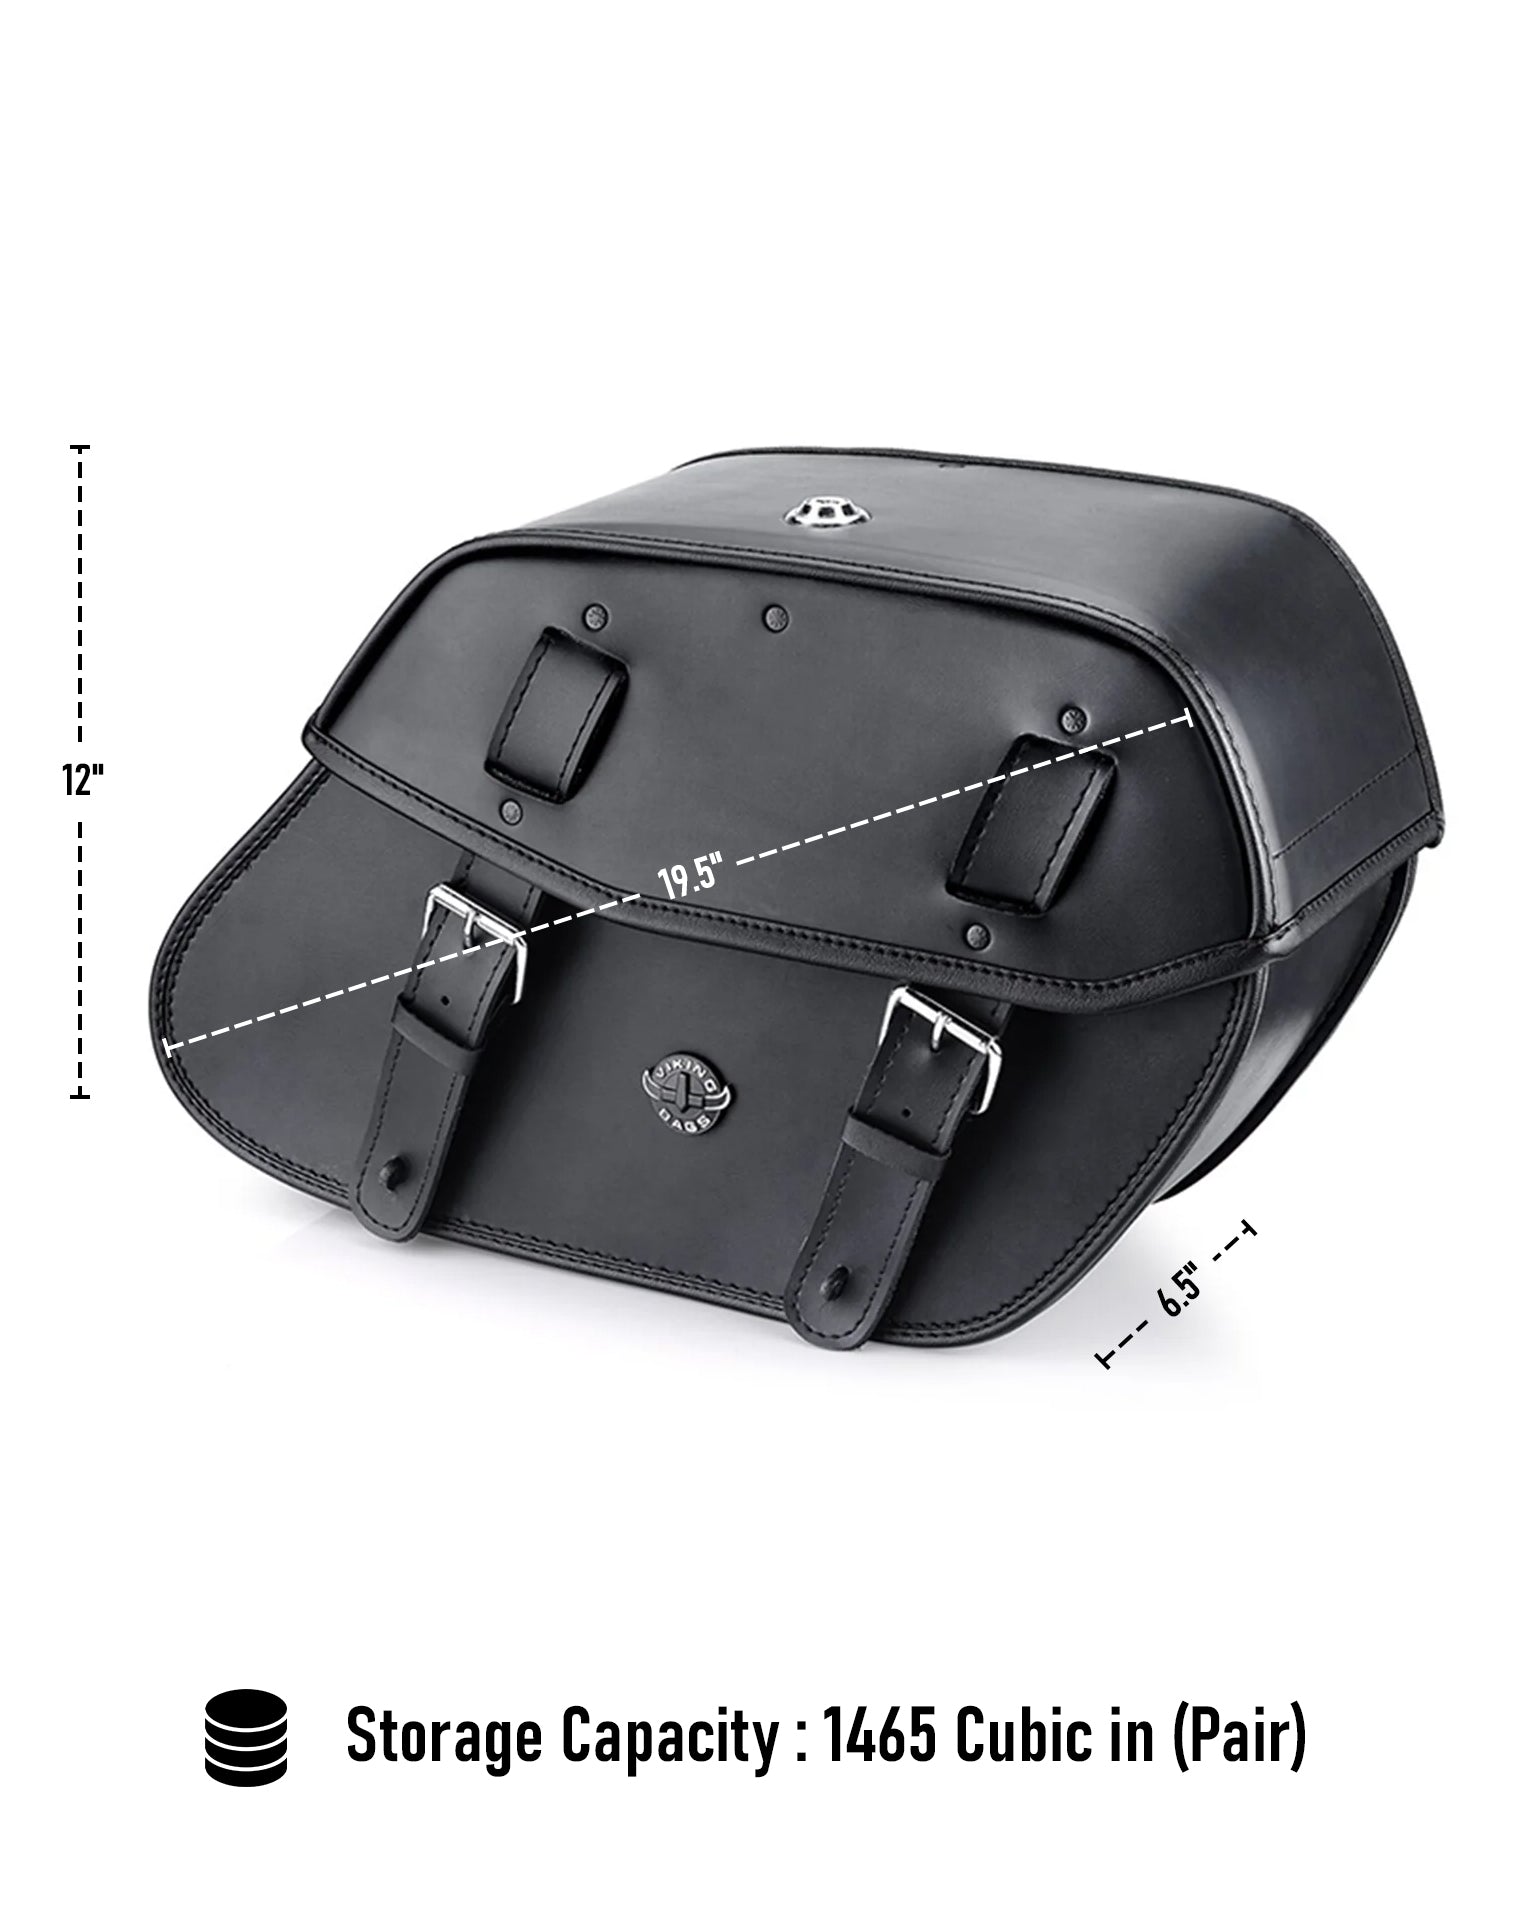 Viking Odin Large Suzuki Boulevard S40 Savage Ls650 Leather Motorcycle Saddlebags Can Store Your Ridings Gears